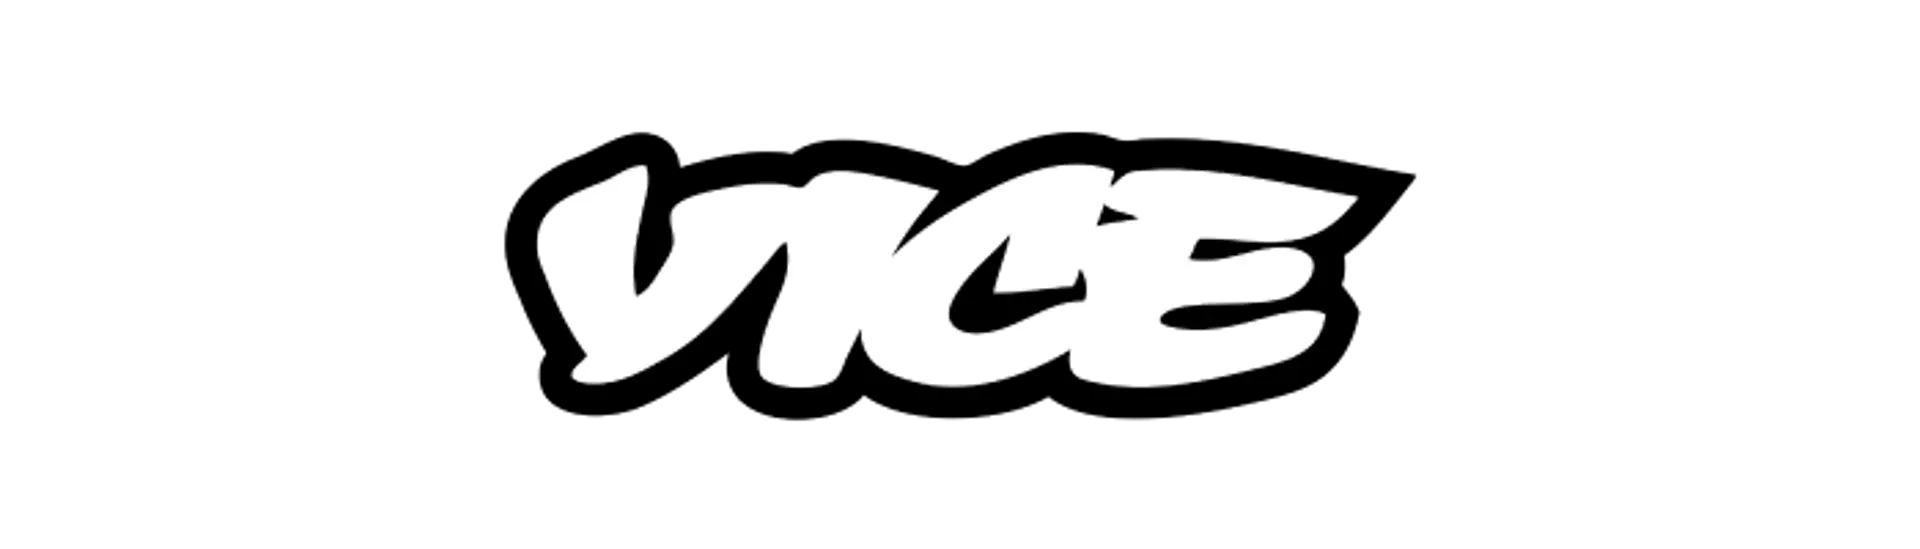 White stylized text spelling "VICE" is set against a black background.